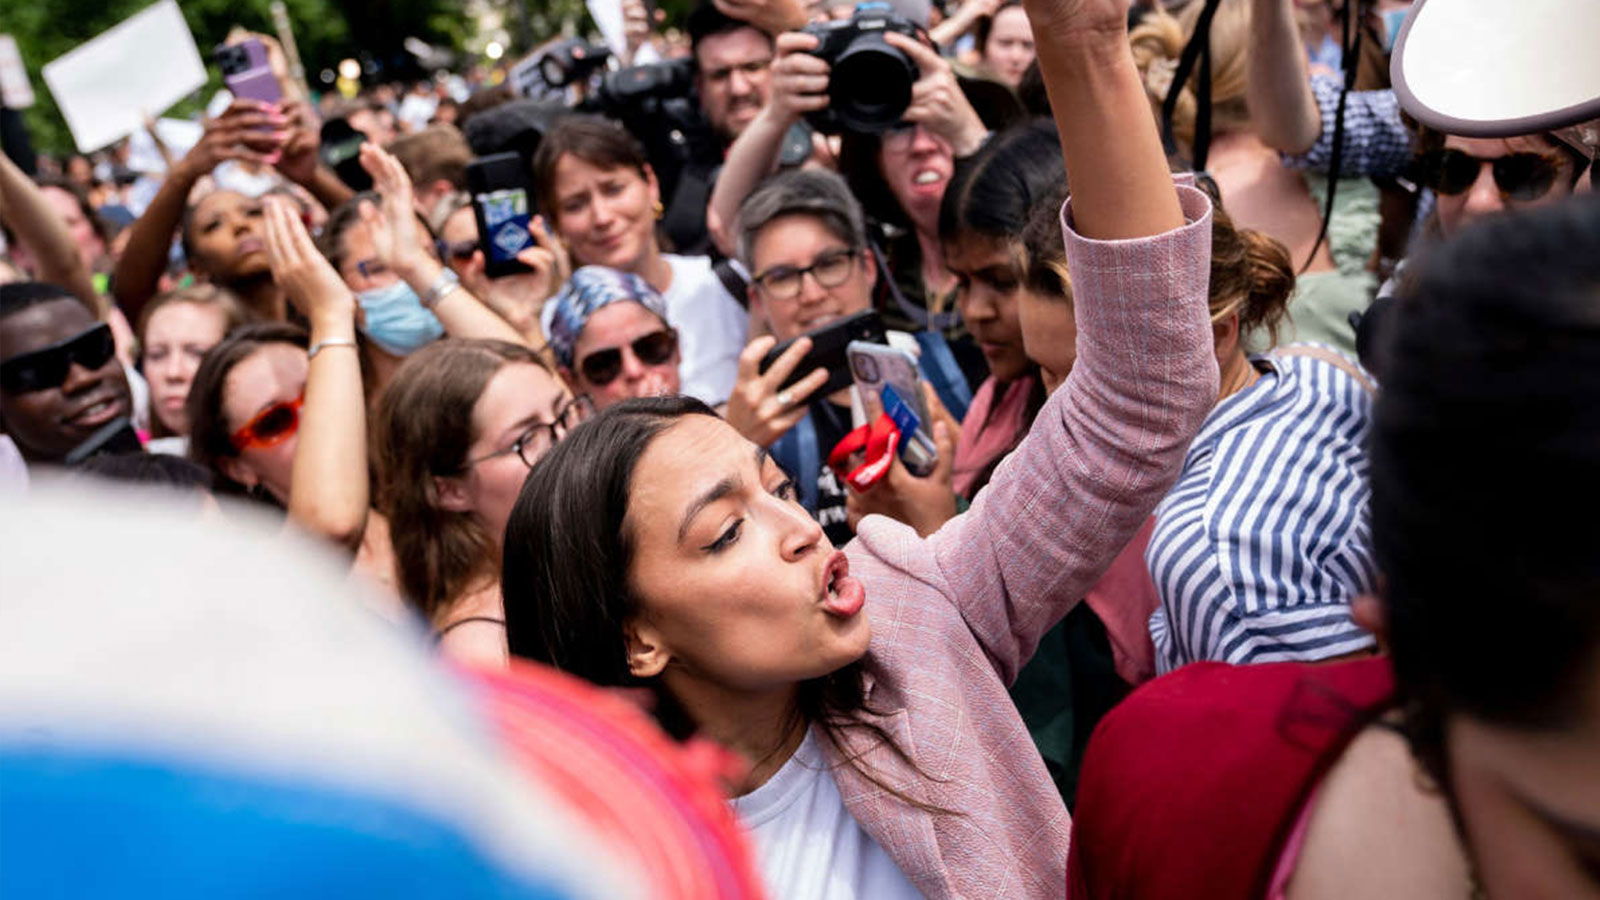 Alexandria Ocasio-Cortez: “We are witnessing a judicial coup in process”